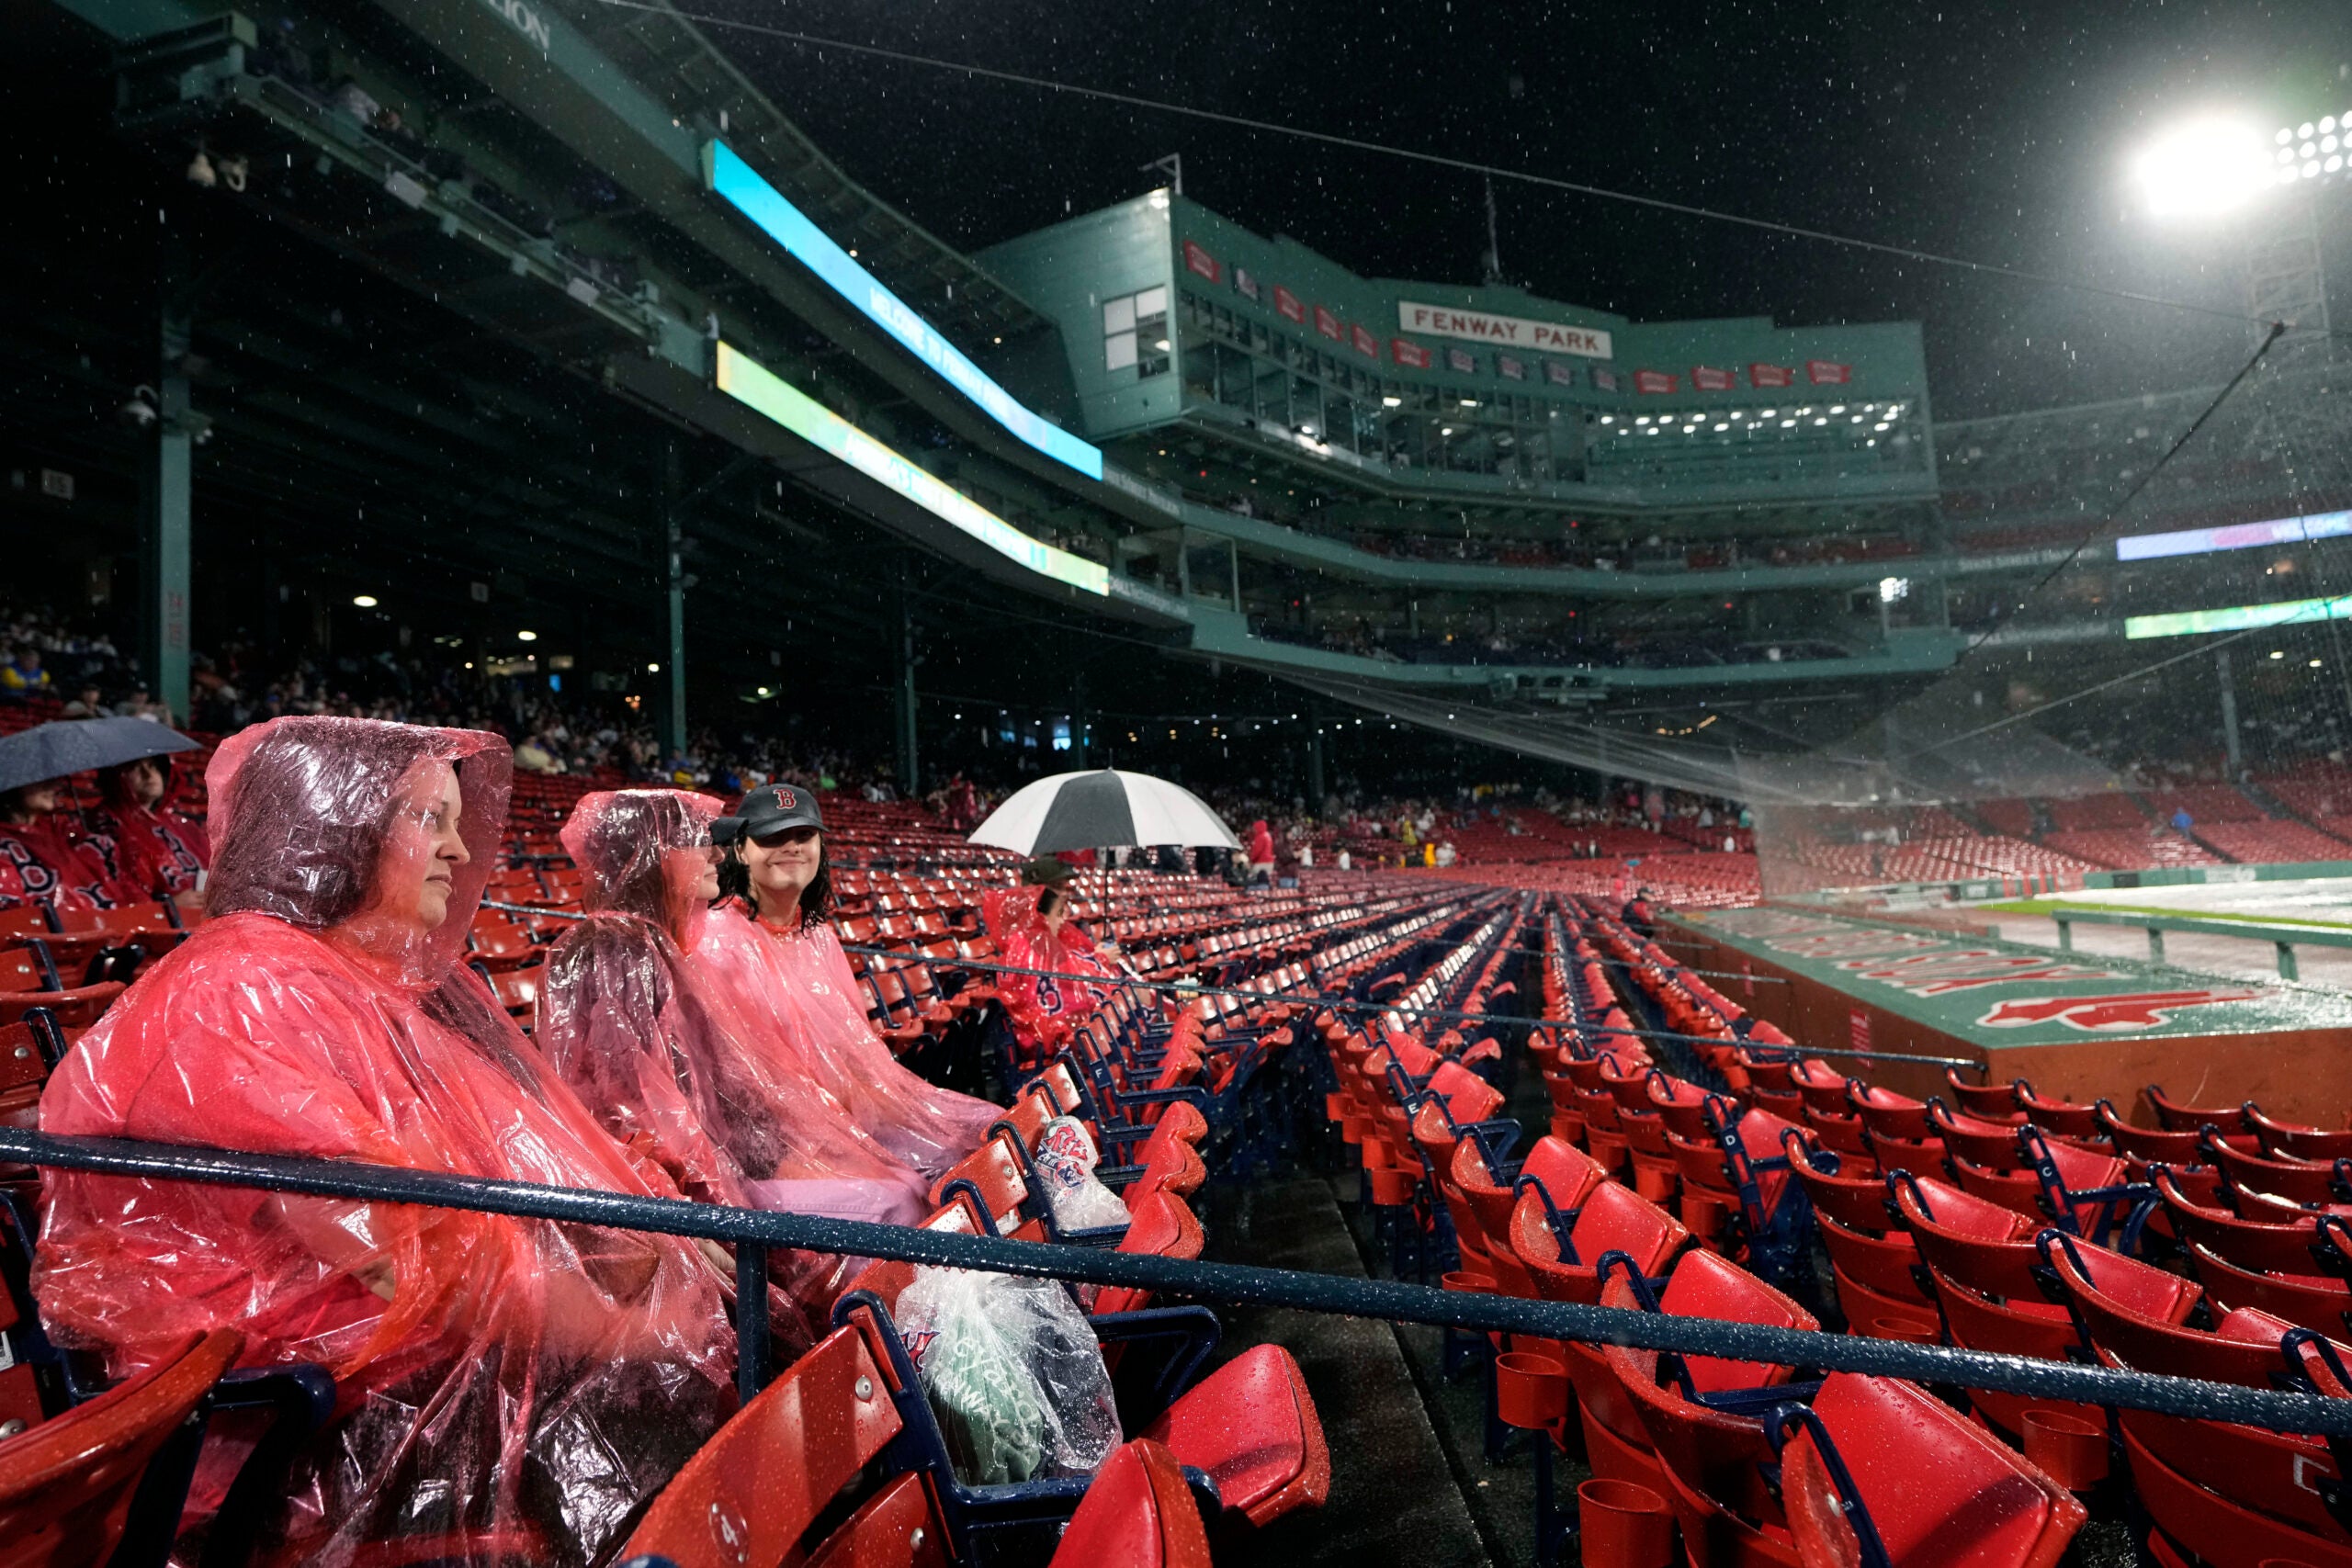 Fans wore ponchos in the stands during a rain delay at Fenway Park Wednesday.